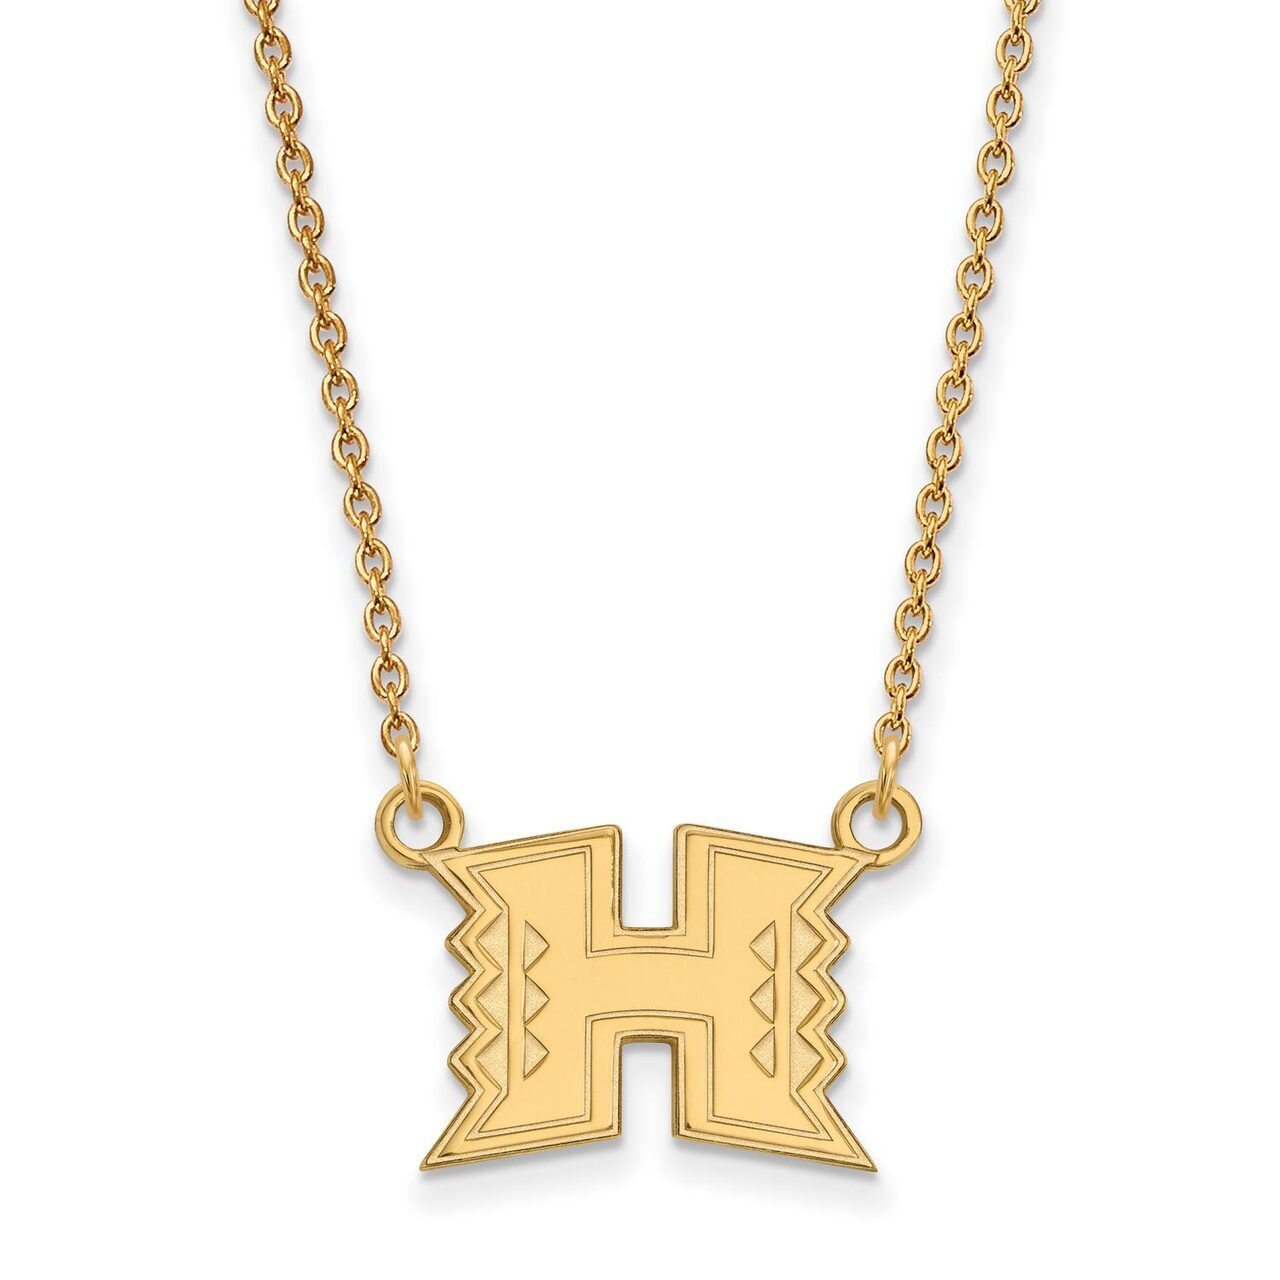 The University of Hawaii Small Pendant with Chain Necklace Gold-plated Silver GP009UHI-18